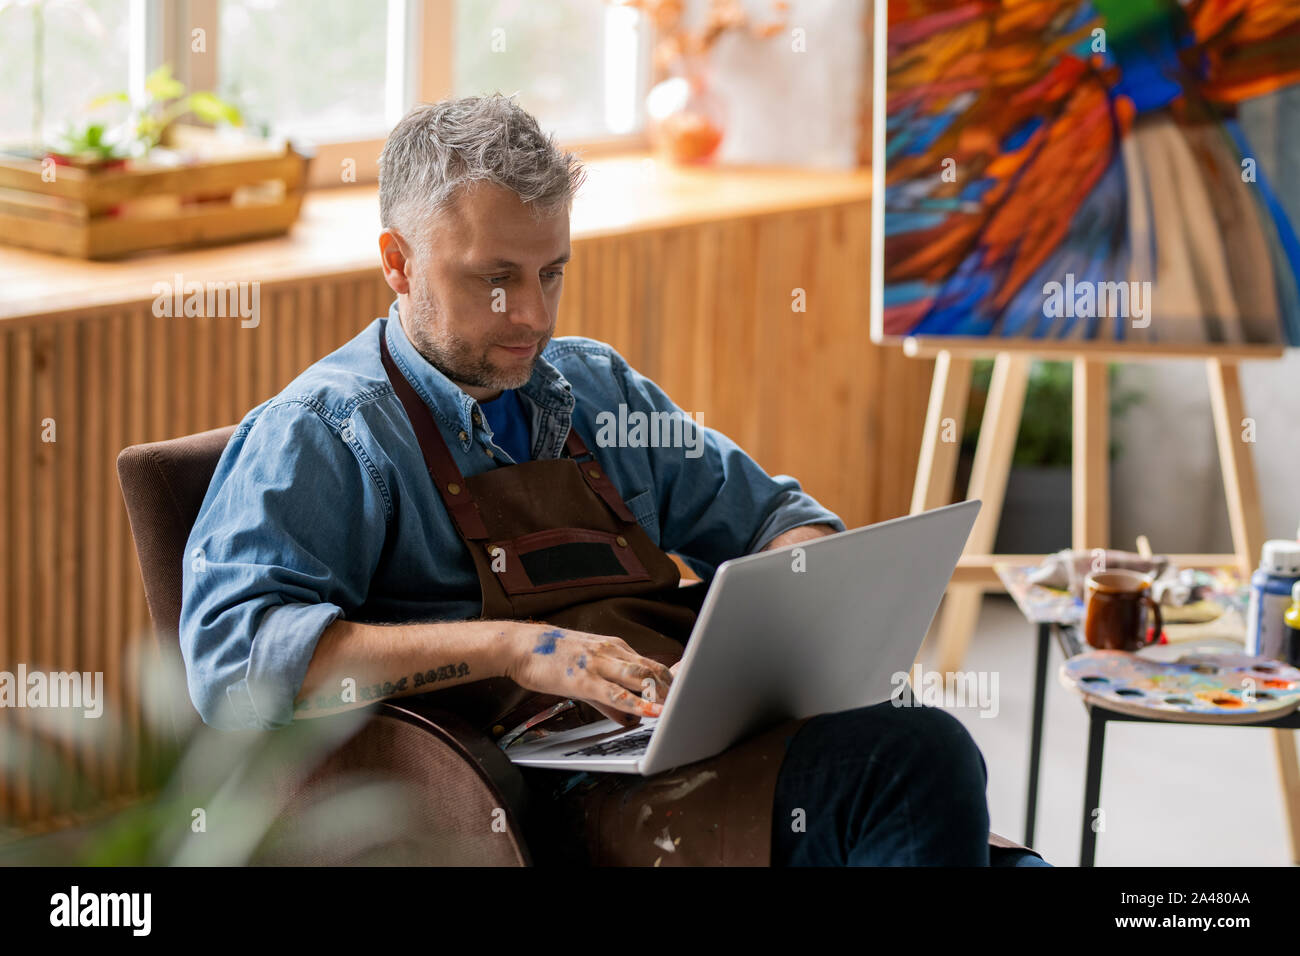 Creative artist concentrating on network while looking at laptop display Stock Photo